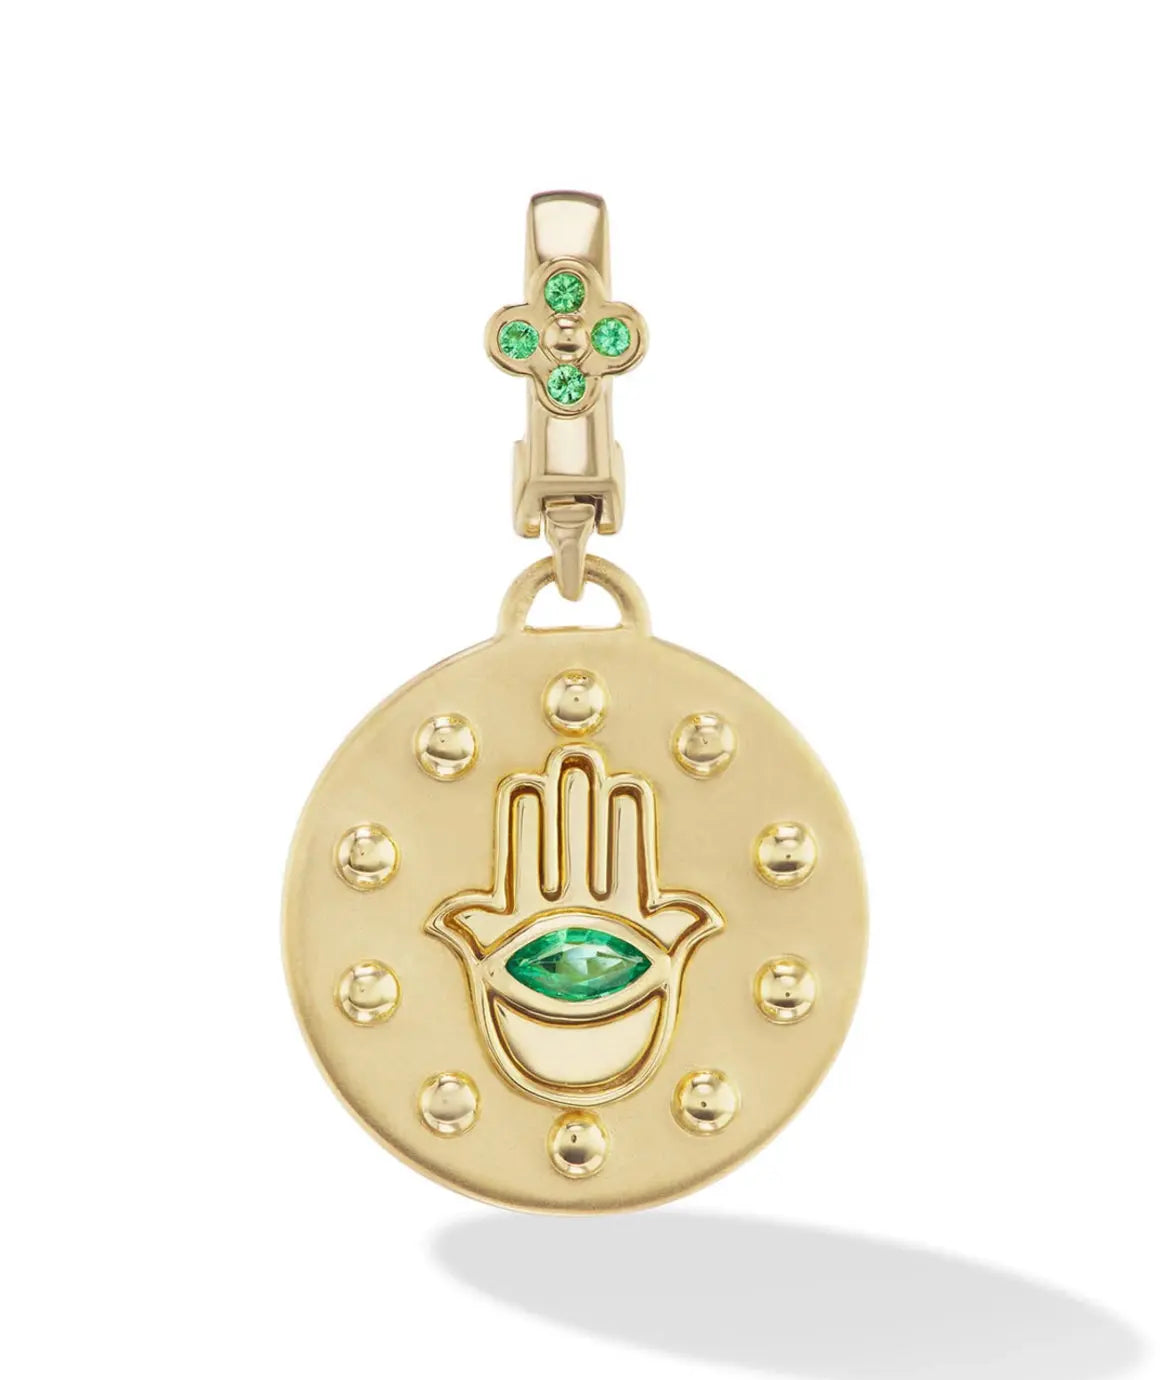 18k Small Green Hamsa Pendant in emerald   Daily Reminder: I Am Protected   Revered for its protective qualities, the Hamsa is an ancient Middle Eastern motif that symbolizes the “Hand of God” and helps to nurture good health and happiness. Our Small Hamsa Pendant is set with a Rubies or Diamonds for extra protection.  SPECIFICATIONS  18K Yellow Gold Size: 16mm  Stones: Emeralds The bale is set with four Rubies and opens enabling easy interchange with other OM jewels